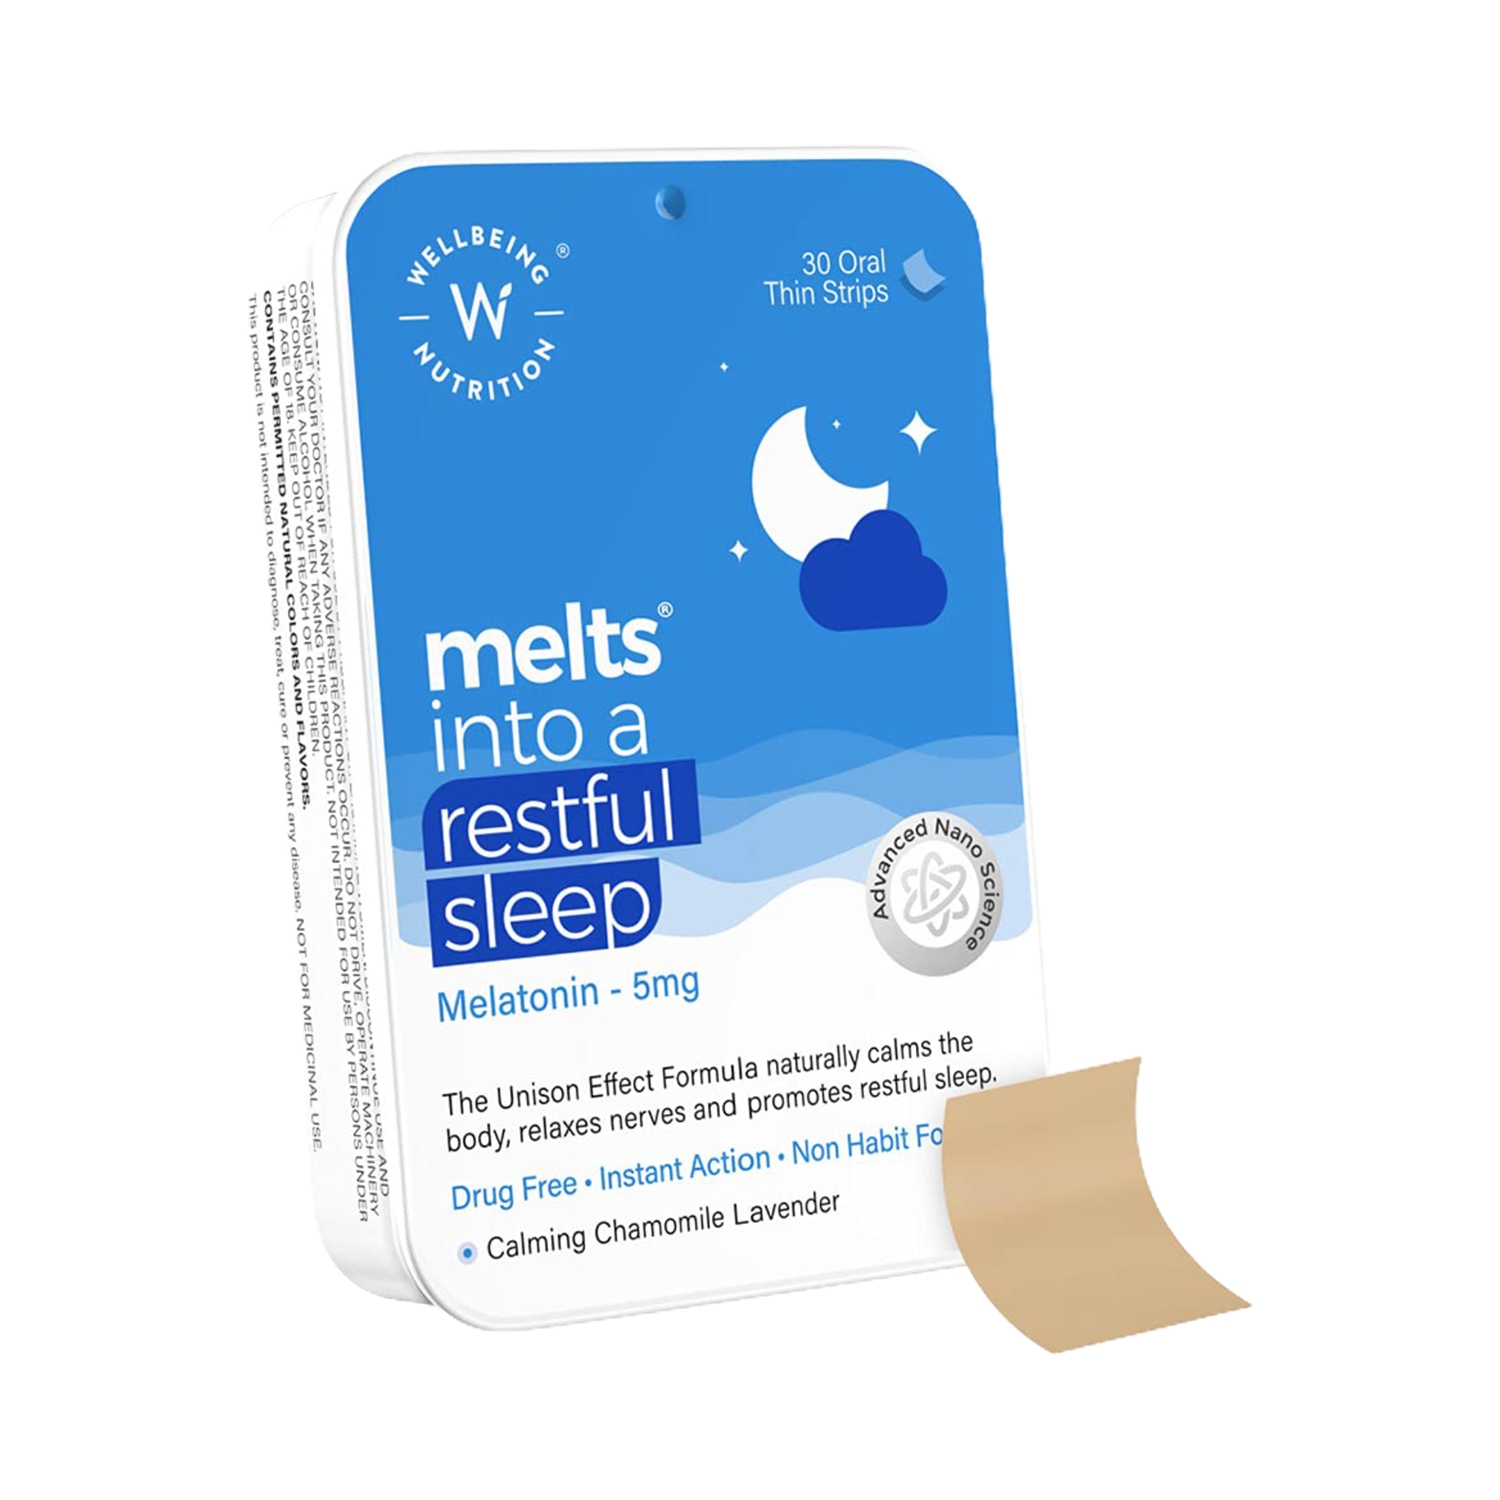 Wellbeing Nutrition | Wellbeing Nutrition Melts Restful Sleep- Drug-free, 10mg Plant-Based Melatonin for Insomnia Relief